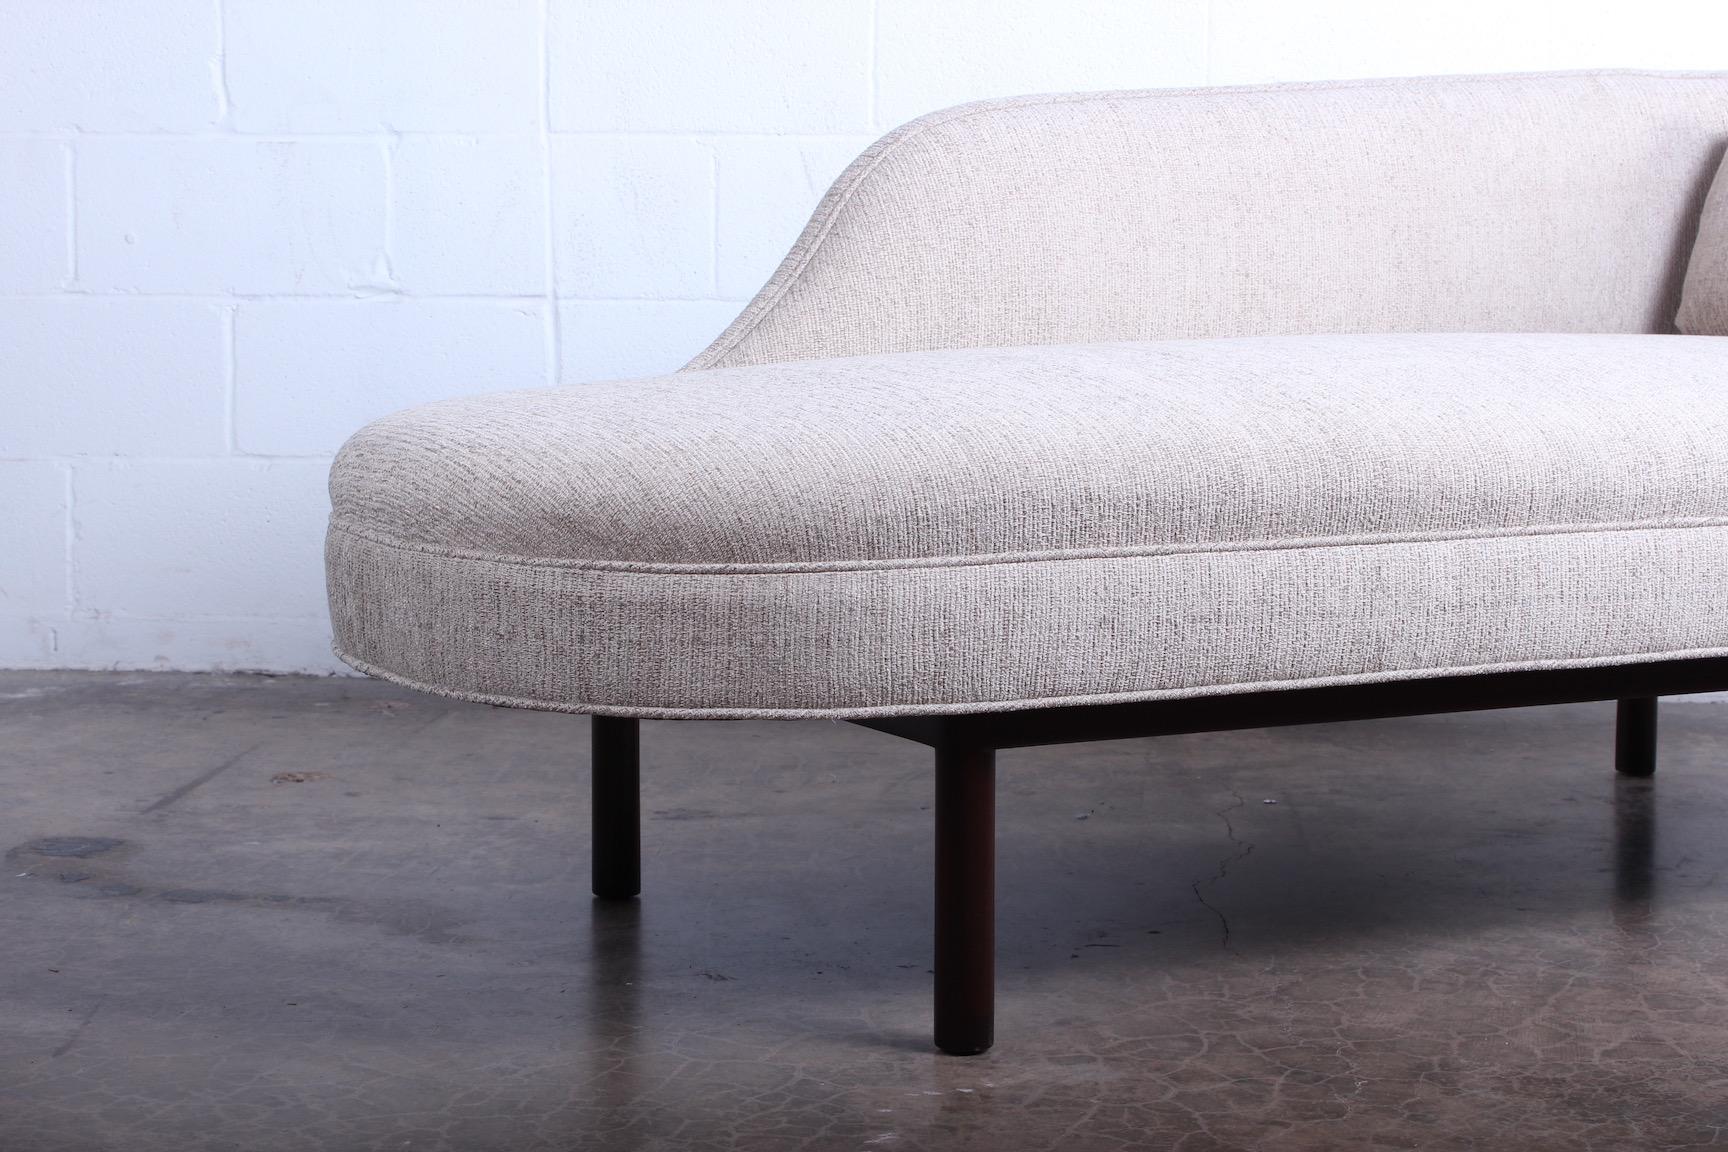 Chaise Lounge by Edward Wormley for Dunbar 1